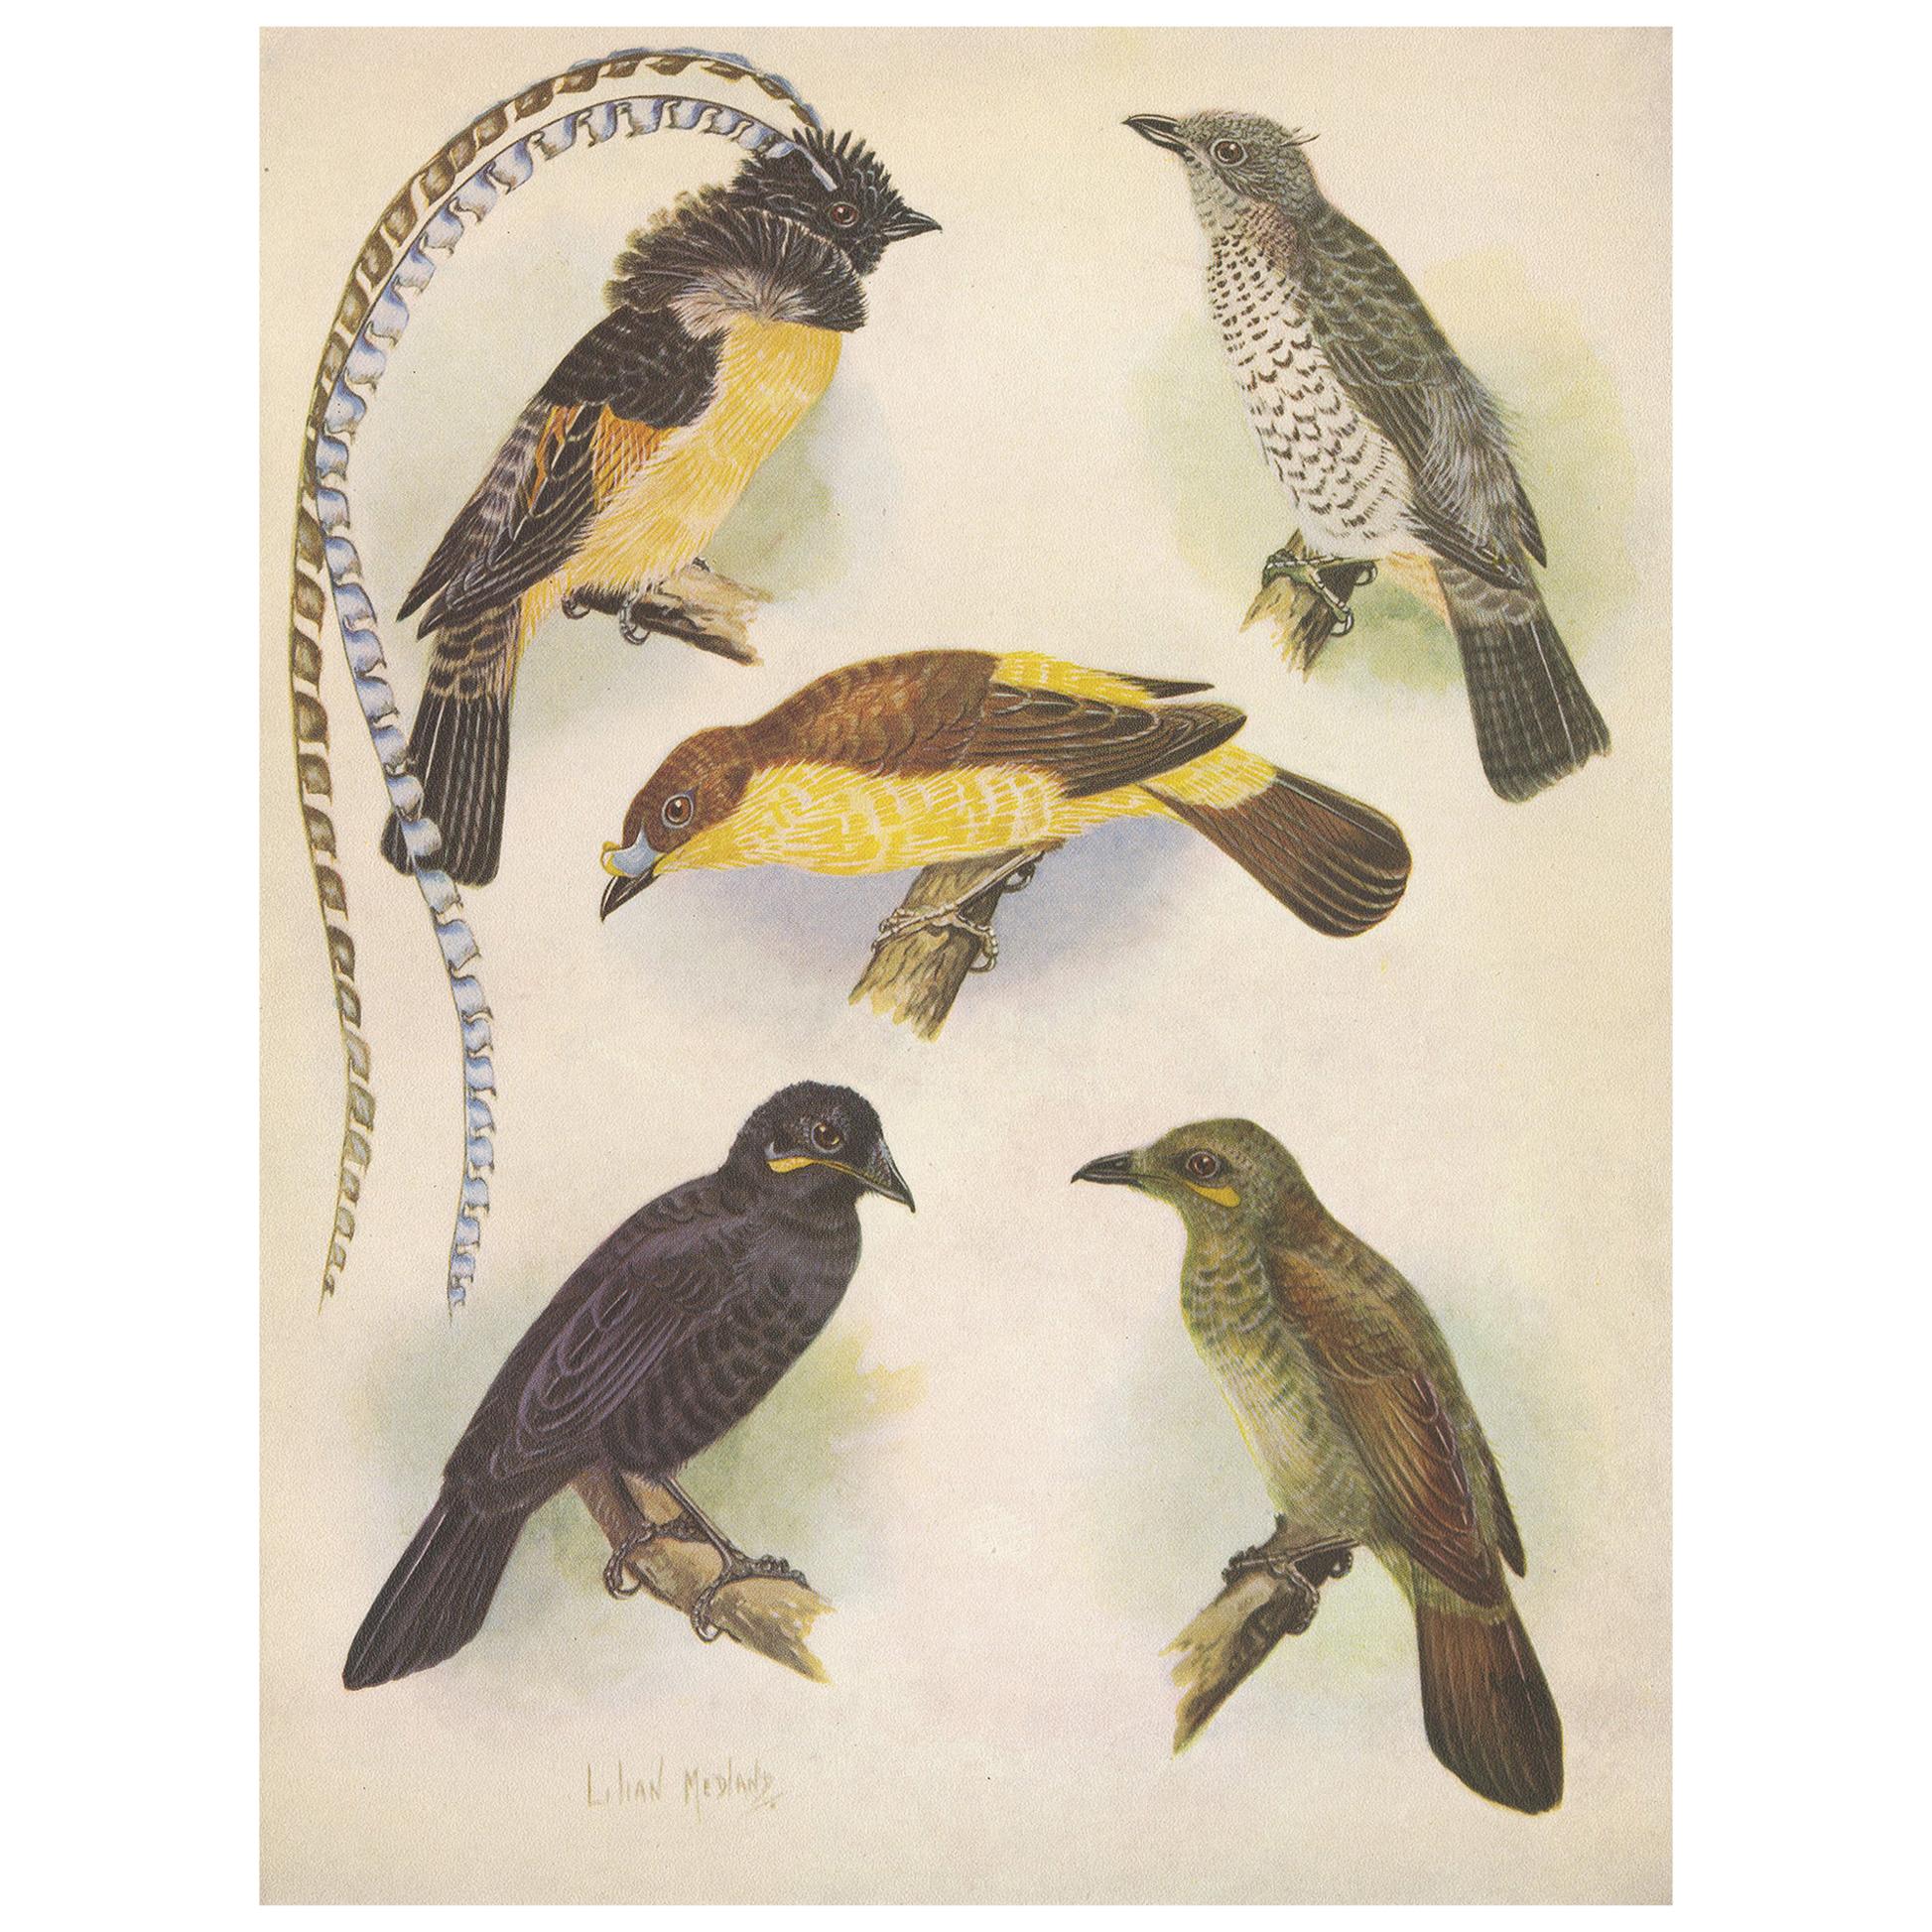 Antique Print of the Enameled Bird, Shield-Bill & Loria's Bird, 1950 For Sale